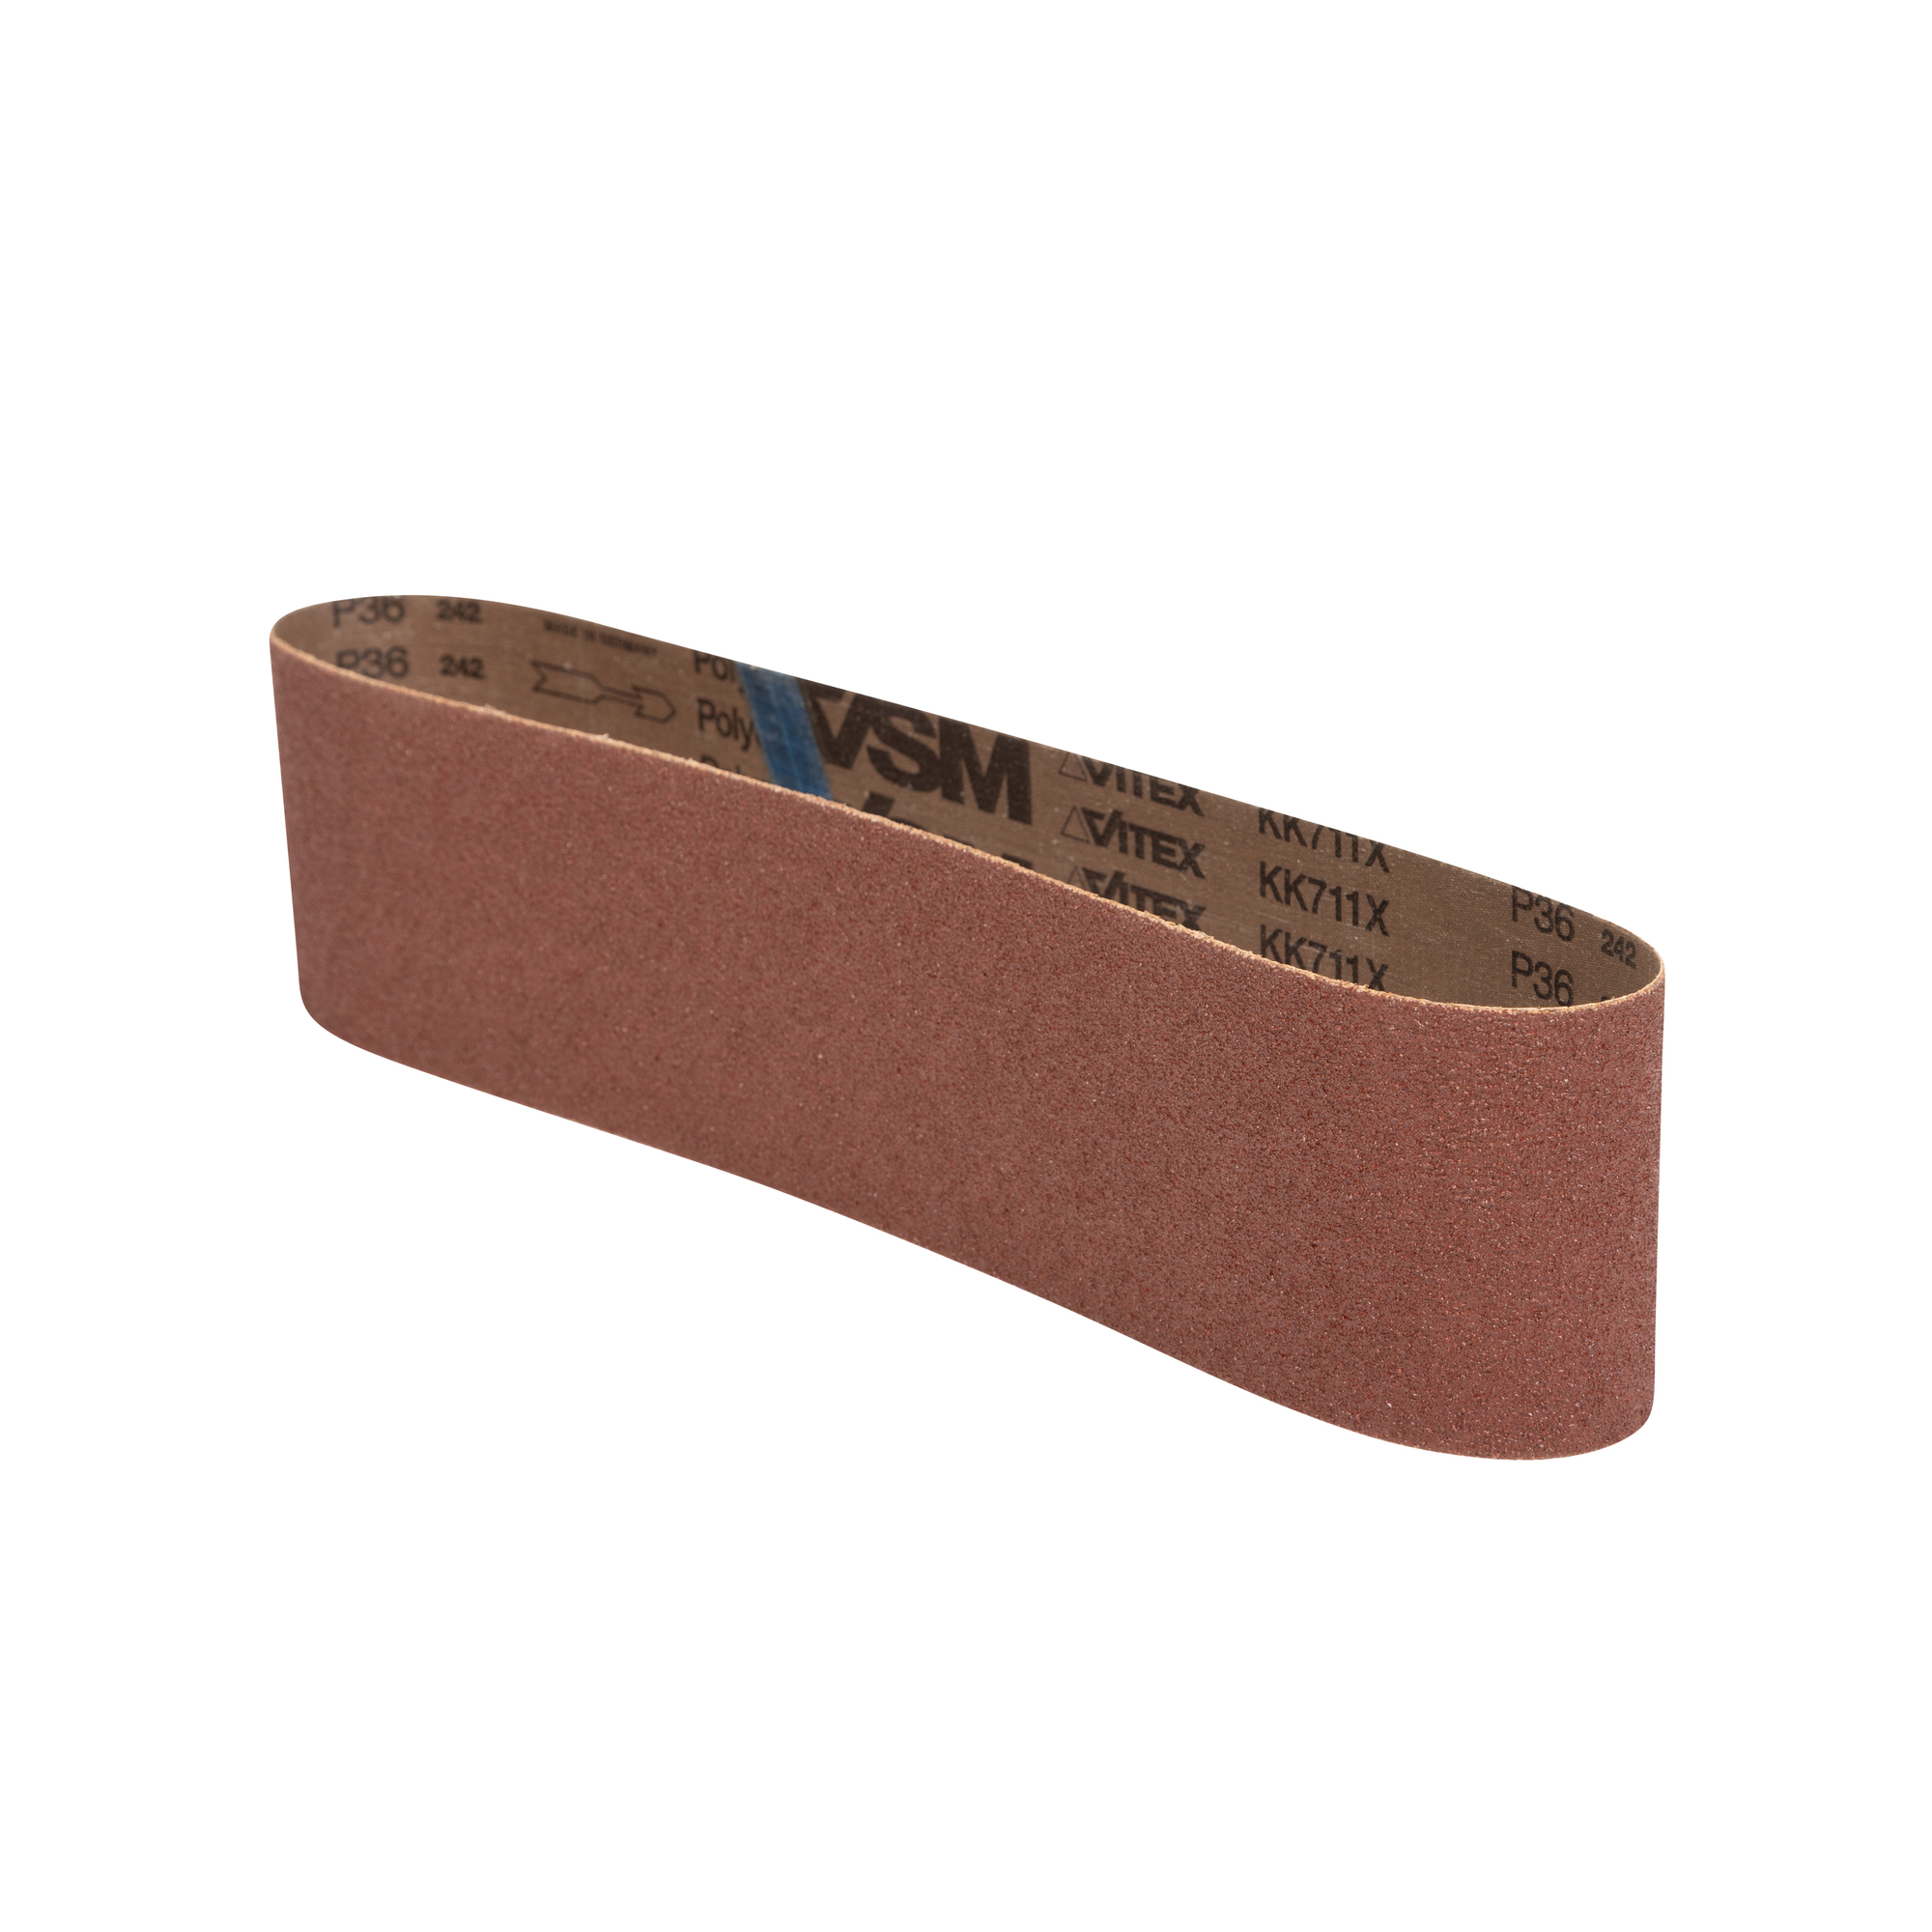 JET, Sand Paper, Pieces (qty.) 3 Grit 36 Length 36 in, Model 577534